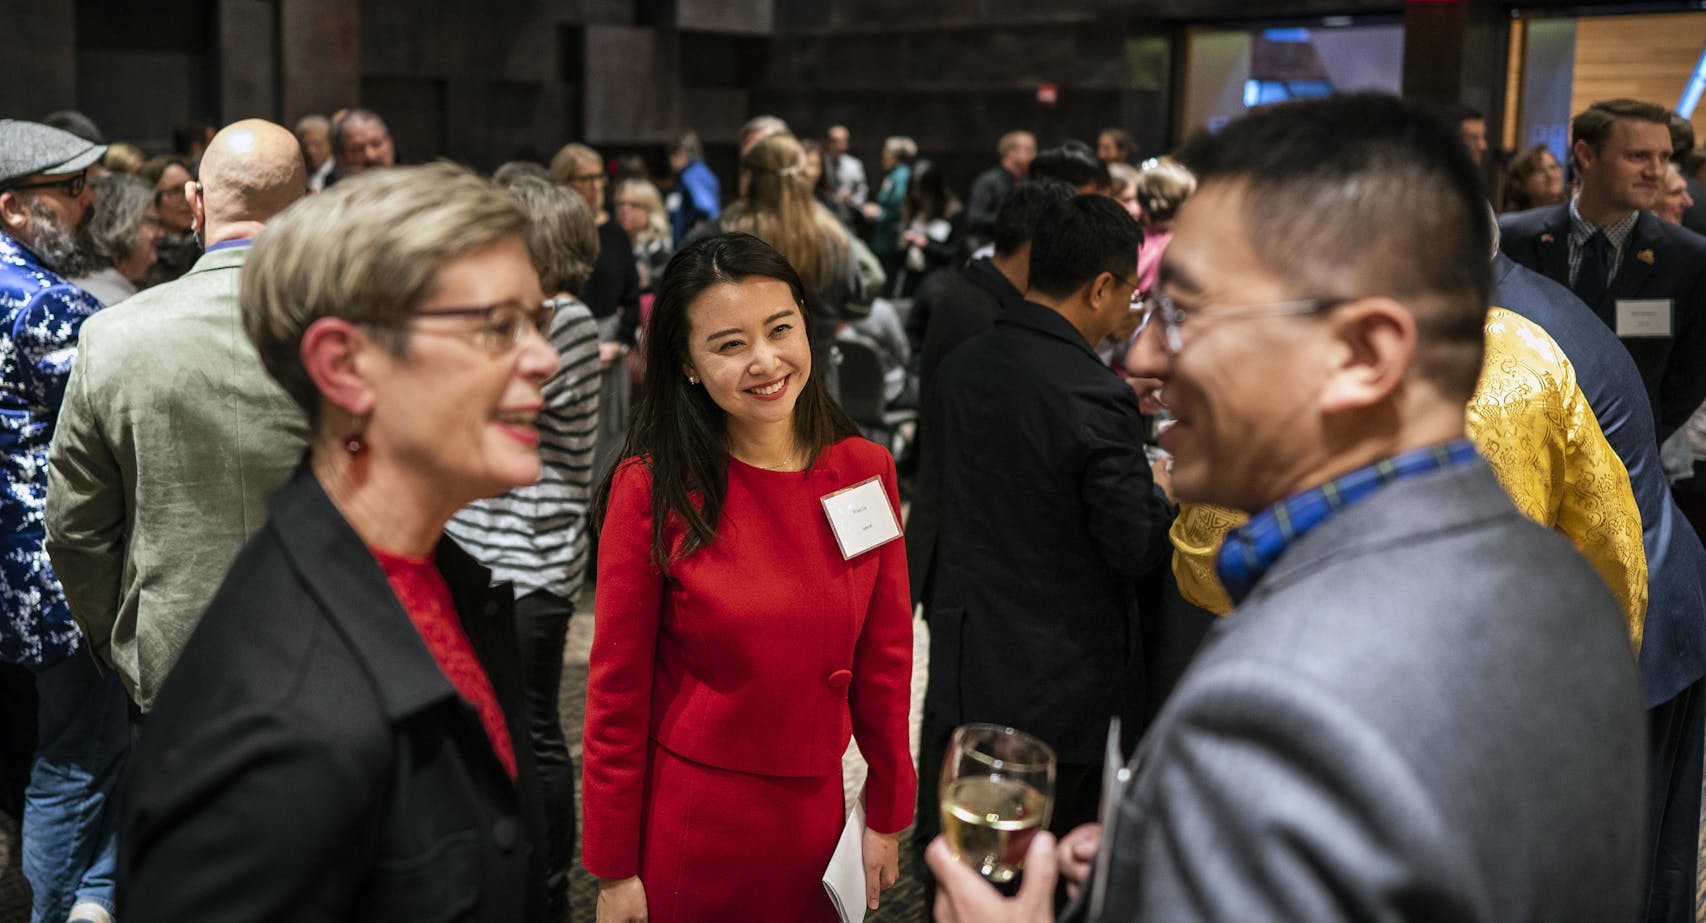 Fran Liu, center, the director of the University of Minnesota's China office in Beijing, talked with Meredith McQuaid, the Associate Vice President and Dean of International Programs for the U, left, and Tony Cui, right, a professor of marketing at the U, at a gala to mark the 40th anniversary of the U's China Center.